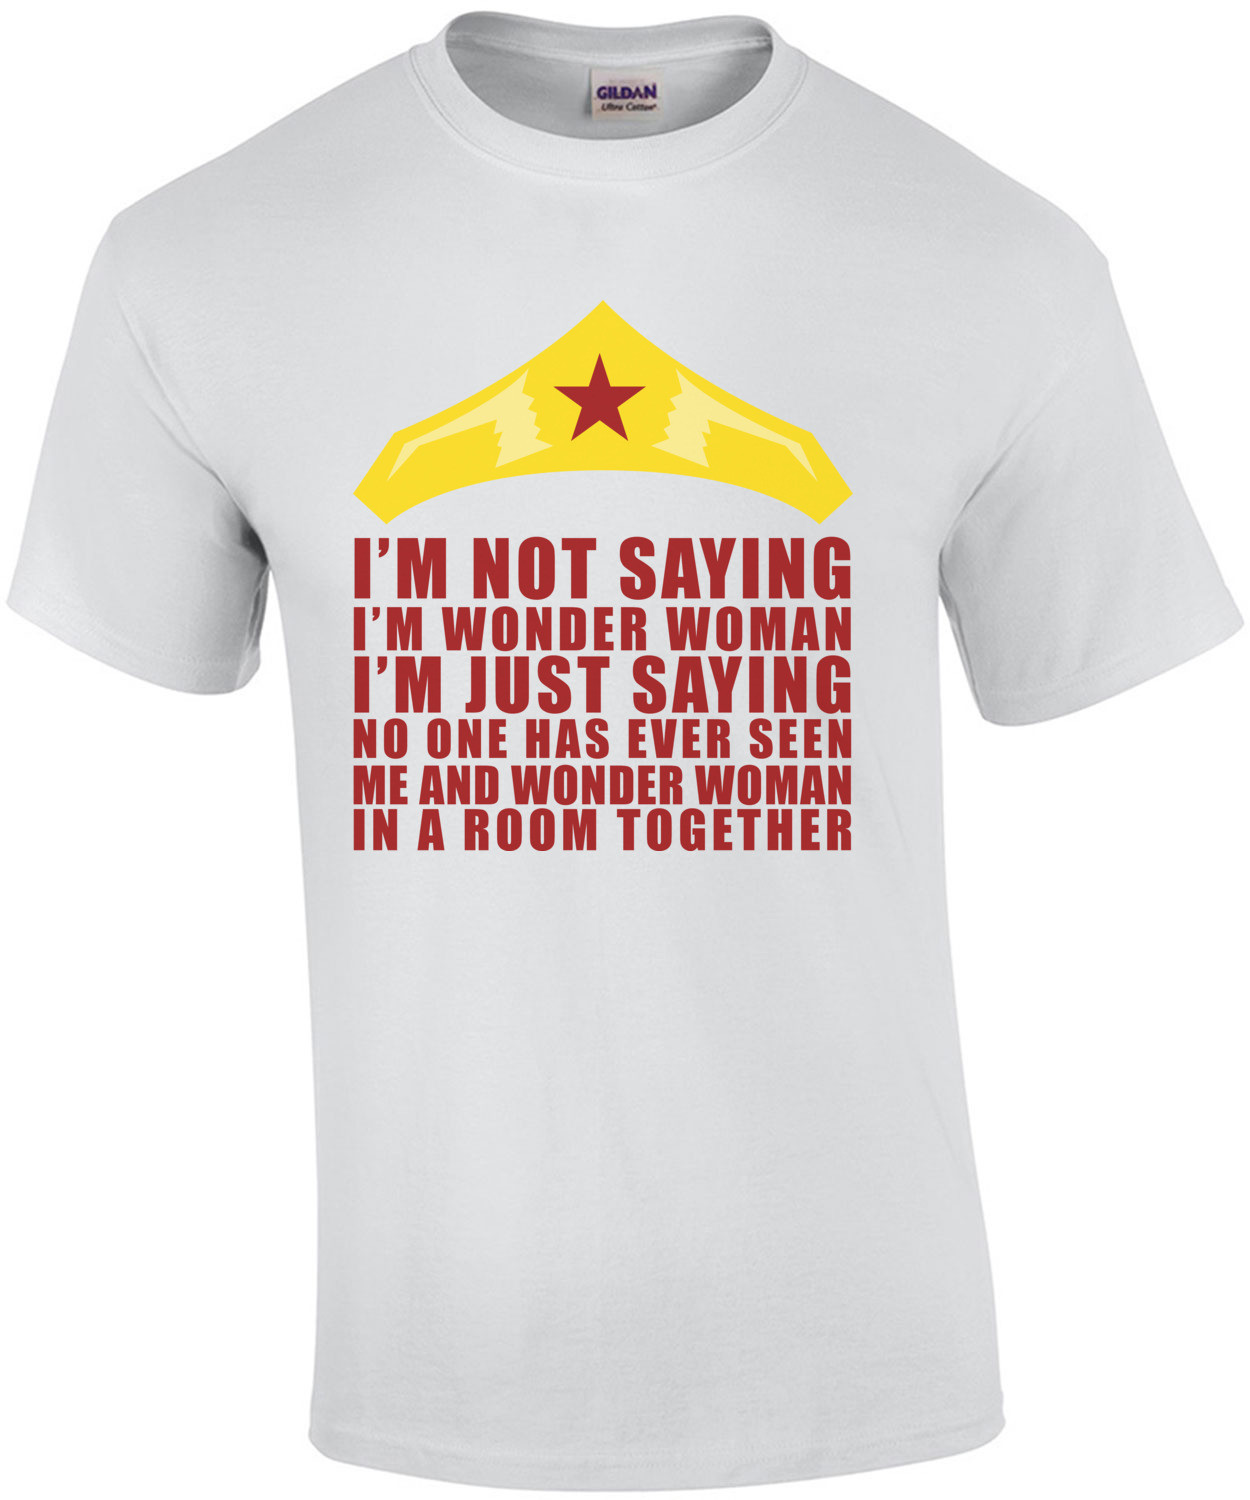 I'm Not Saying I'm Wonder Woman. I'm Just Saying That No One Has Ever Seen Me And Wonder Woman In A Room Together. Shirt